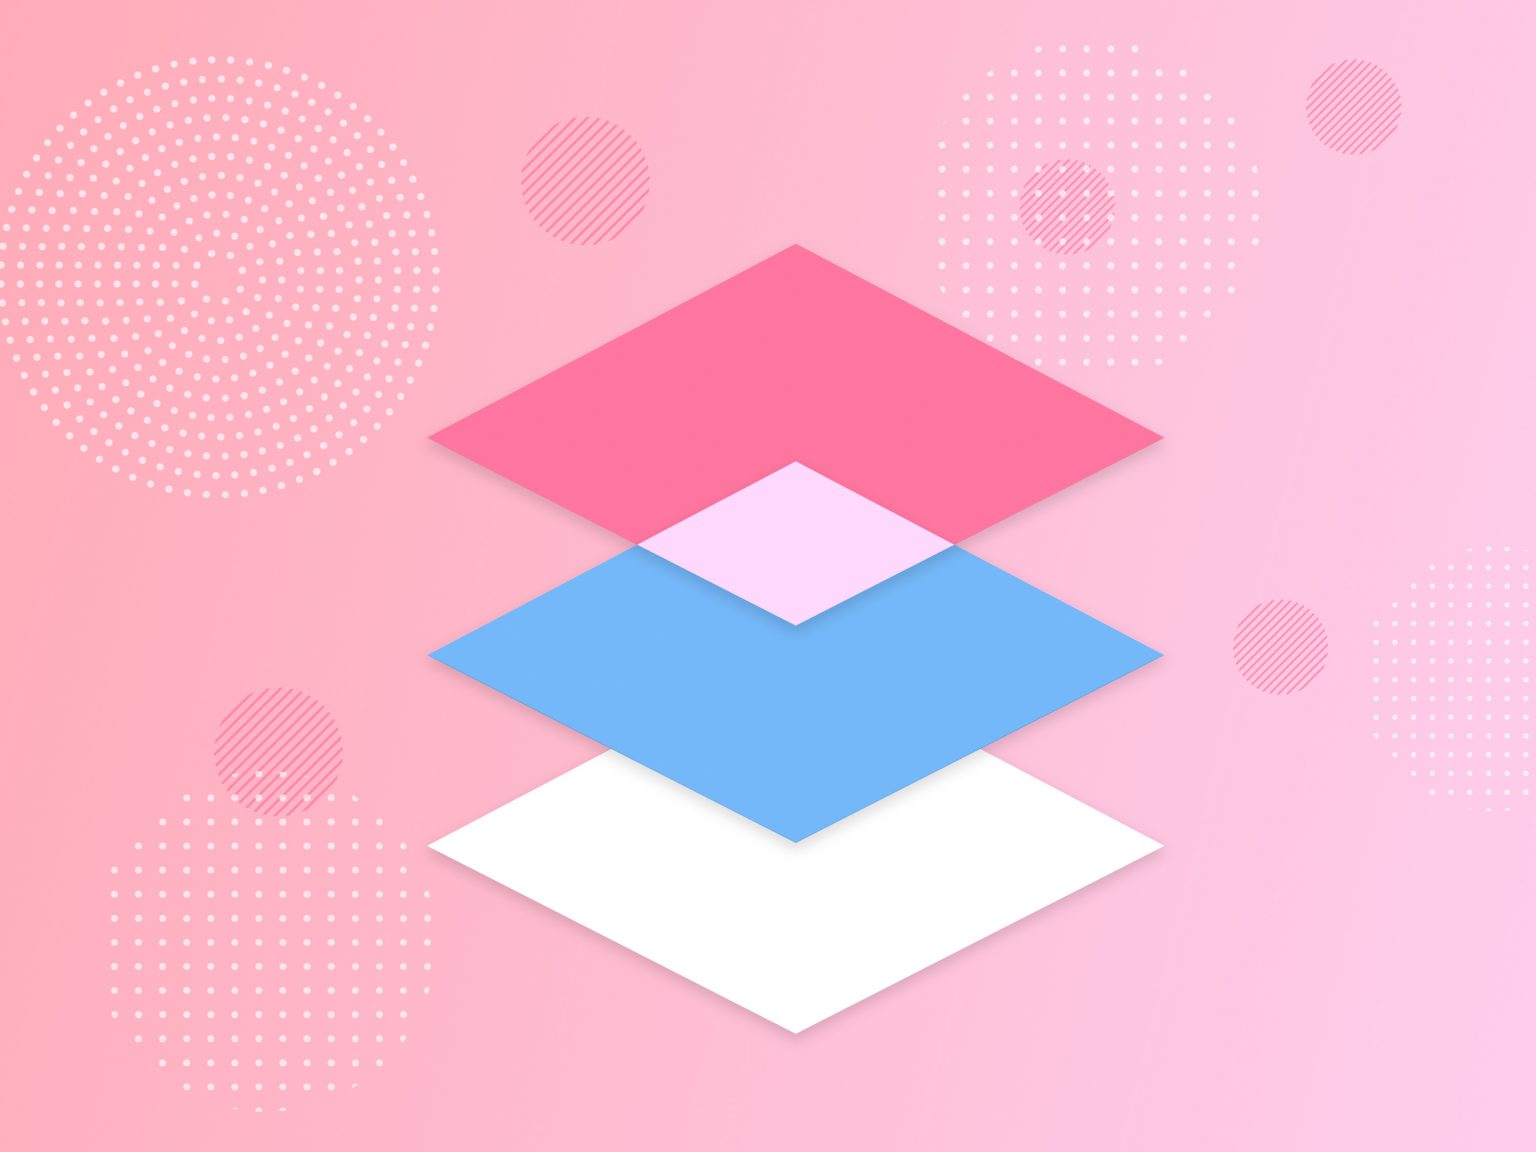 what is material design